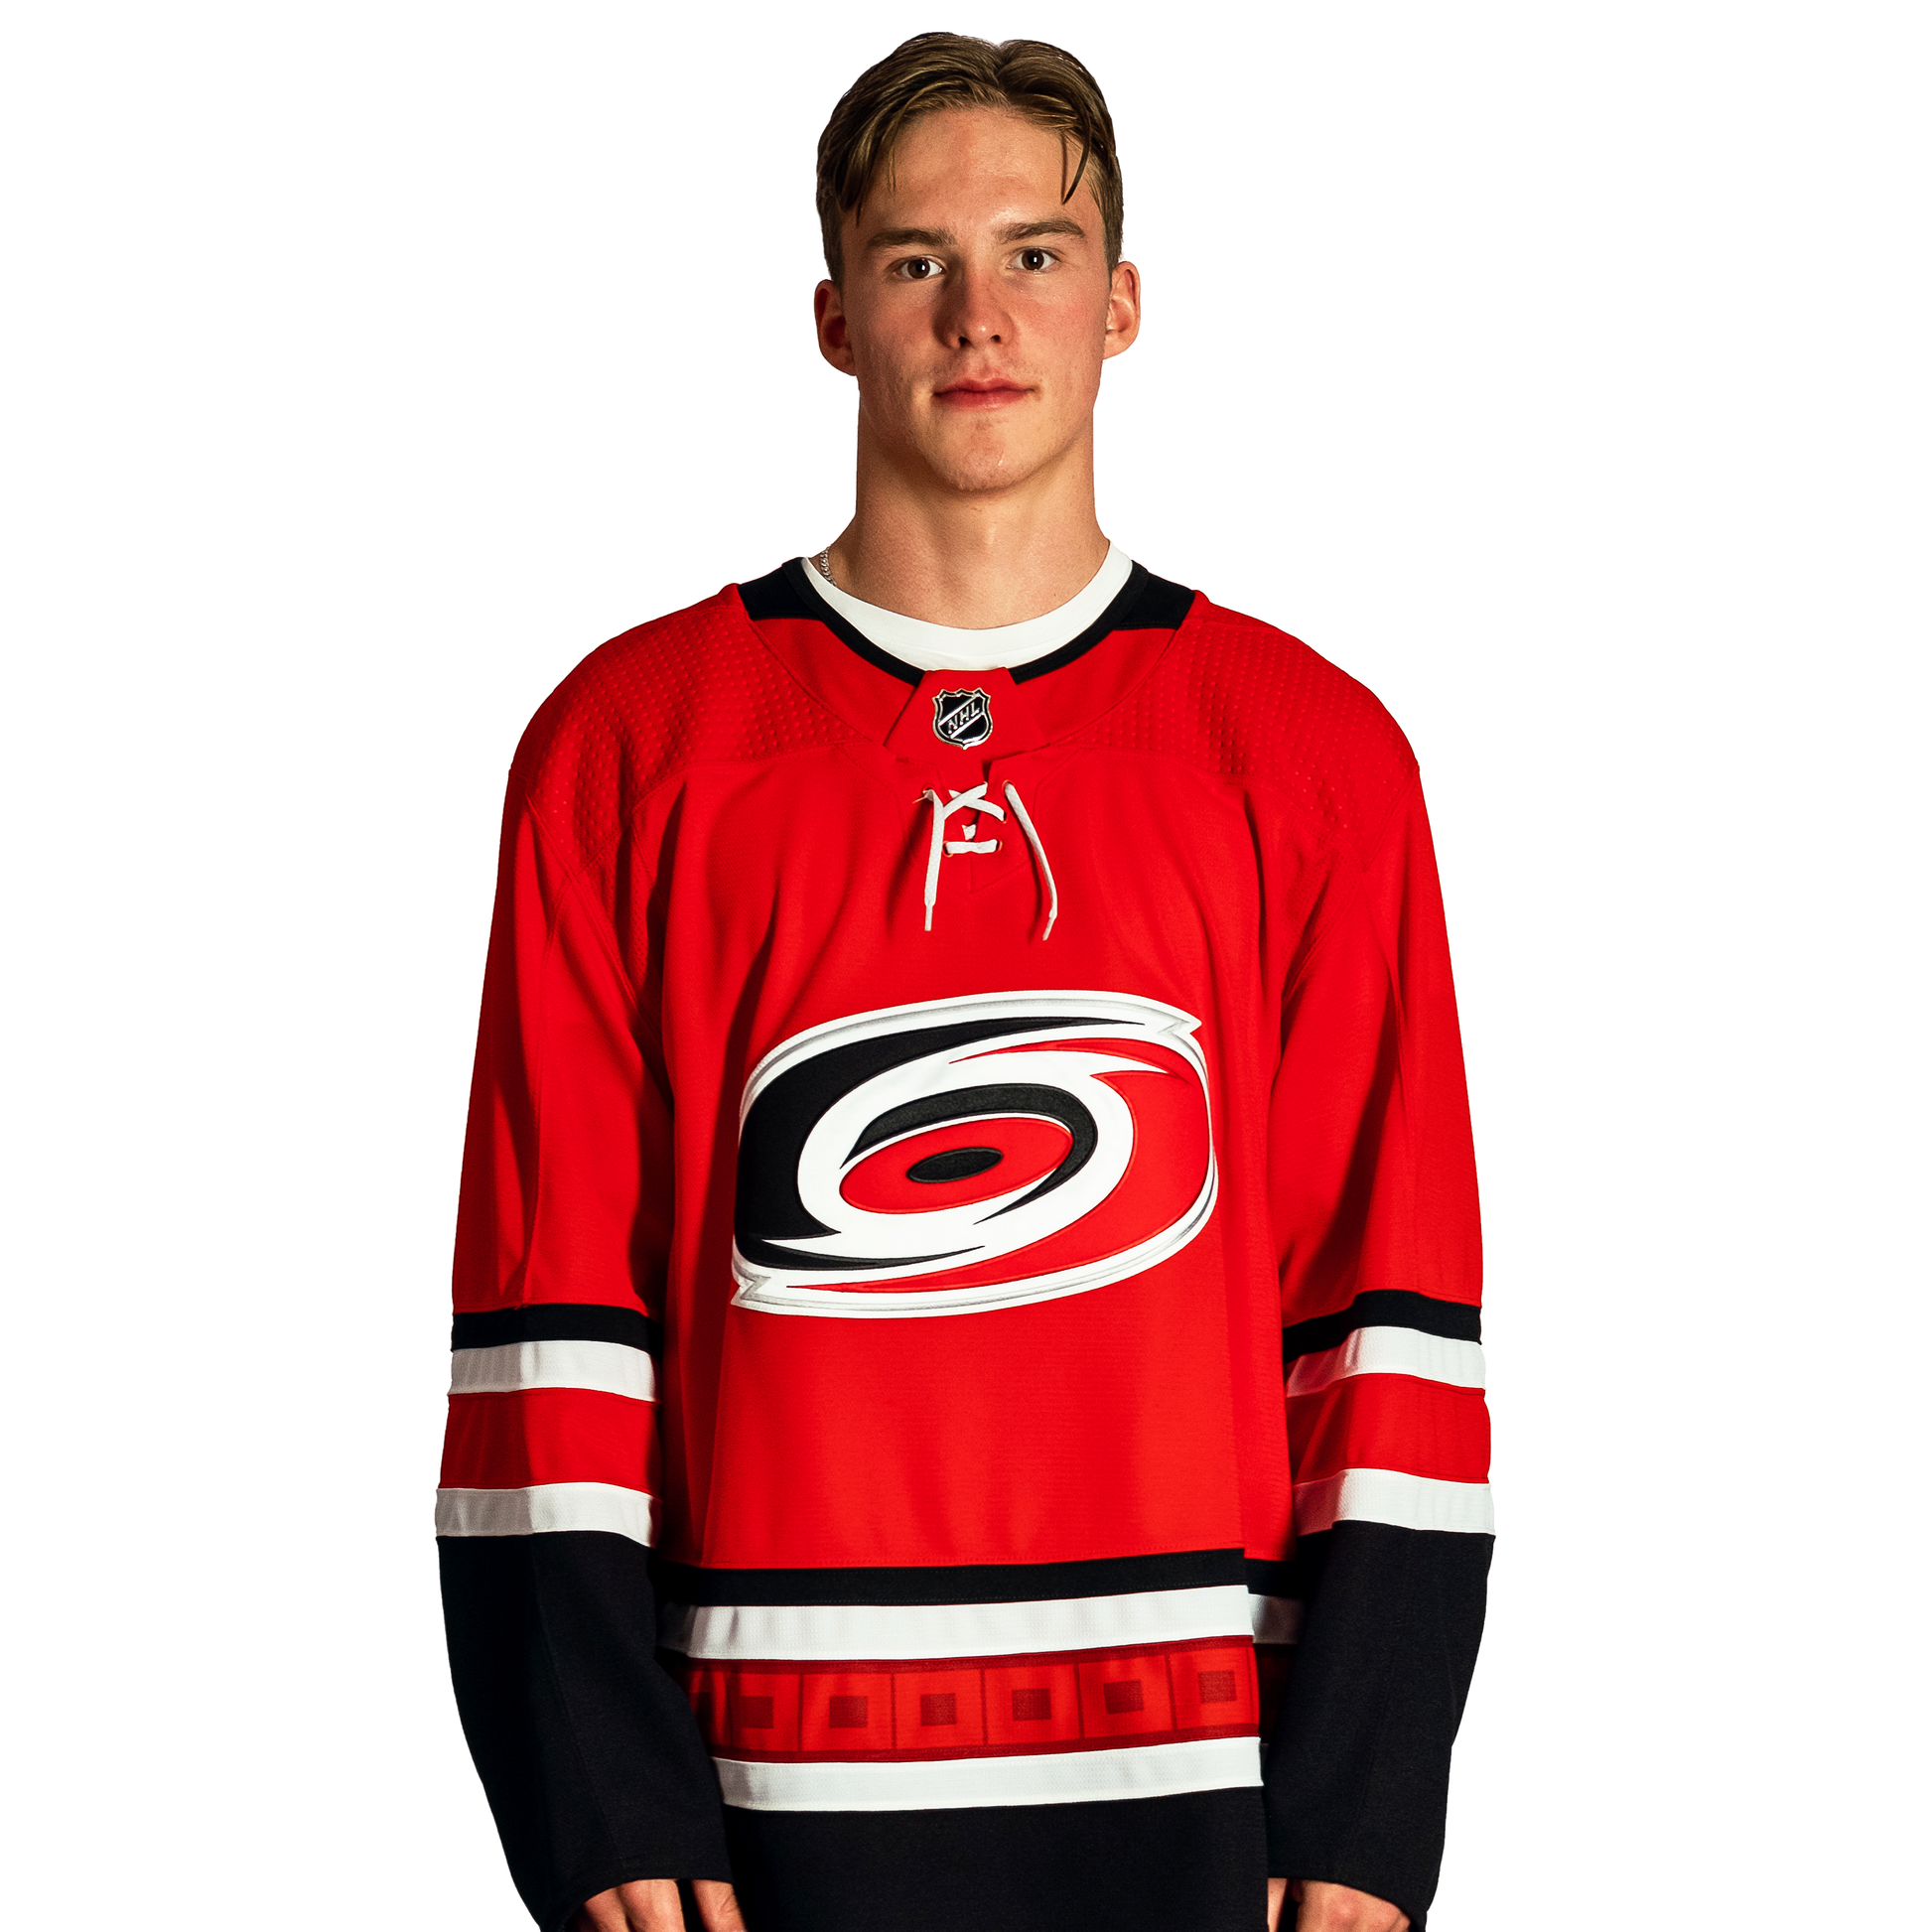 Andrei Svechnikov wearing the red jersey.